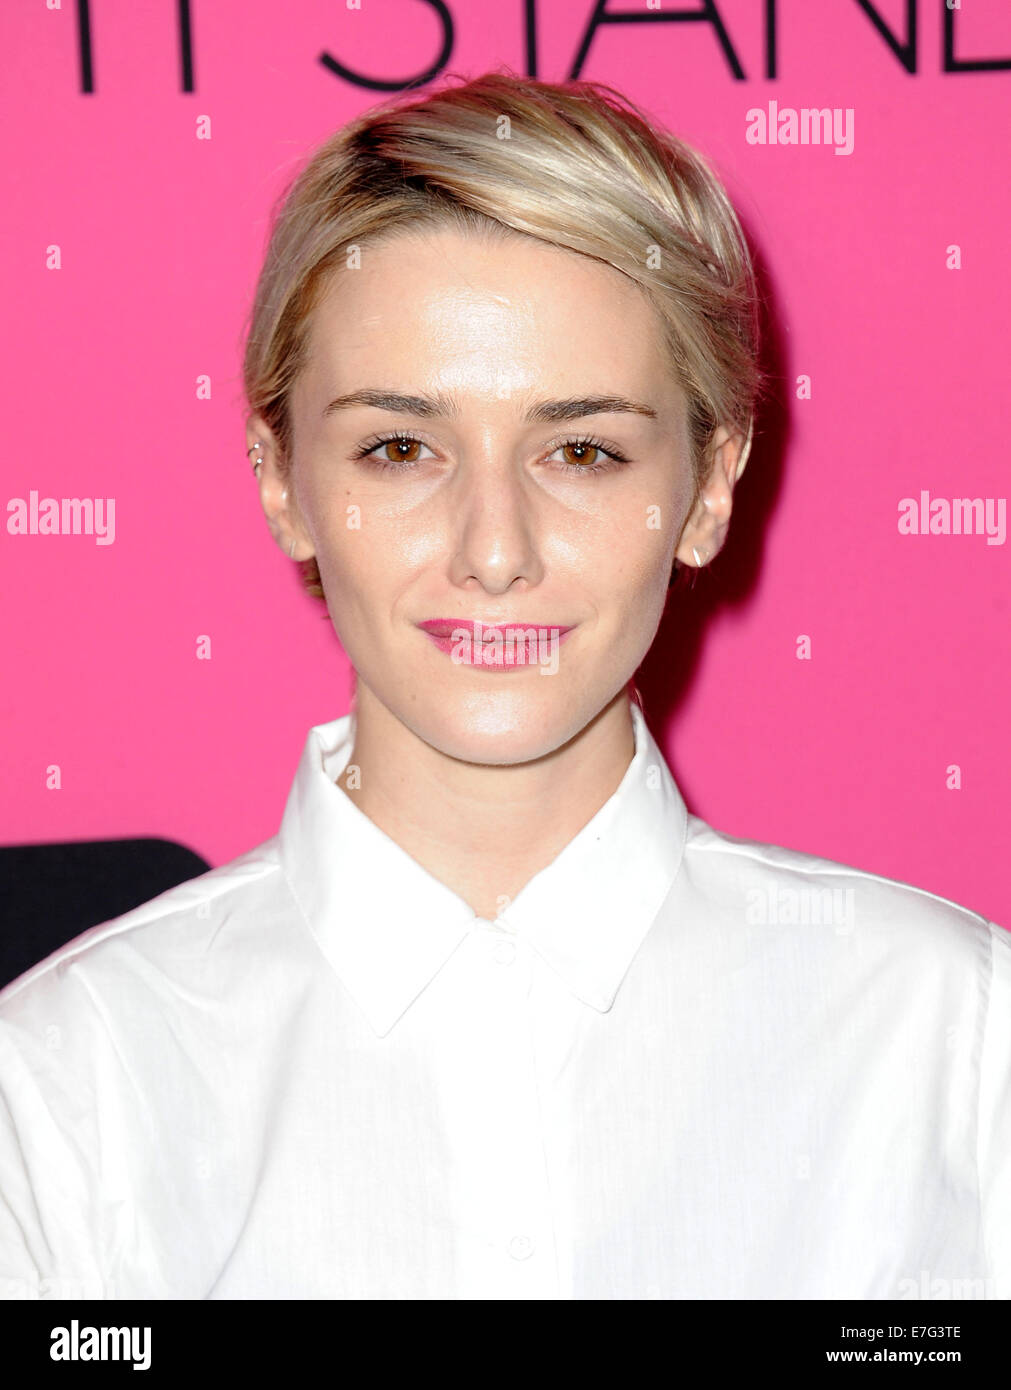 Los Angeles, California, USA. 16th Sep, 2014. Addison Timlin attending the Los Angeles Premiere of ''Two Night Stand'' held at the TCL Chinese 6 Theatre in Hollywood, California on September 16, 2014. 2014 Credit:  D. Long/Globe Photos/ZUMA Wire/Alamy Live News Stock Photo